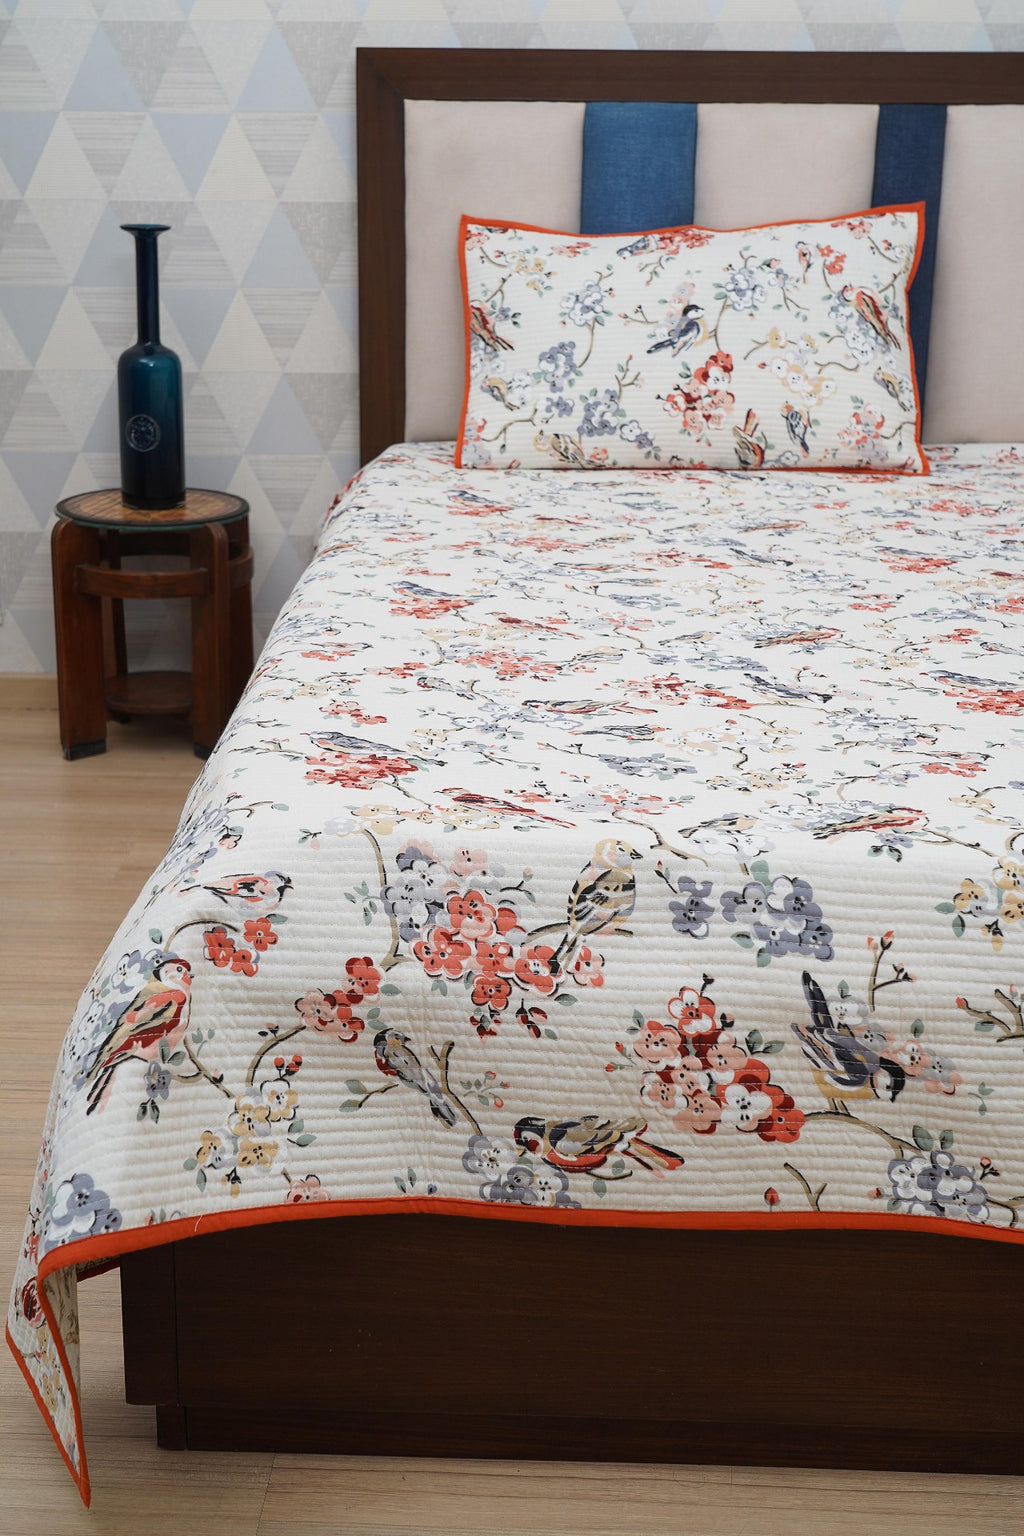 Cotton Quilted Bed Cover - Birds Floral Rust Border